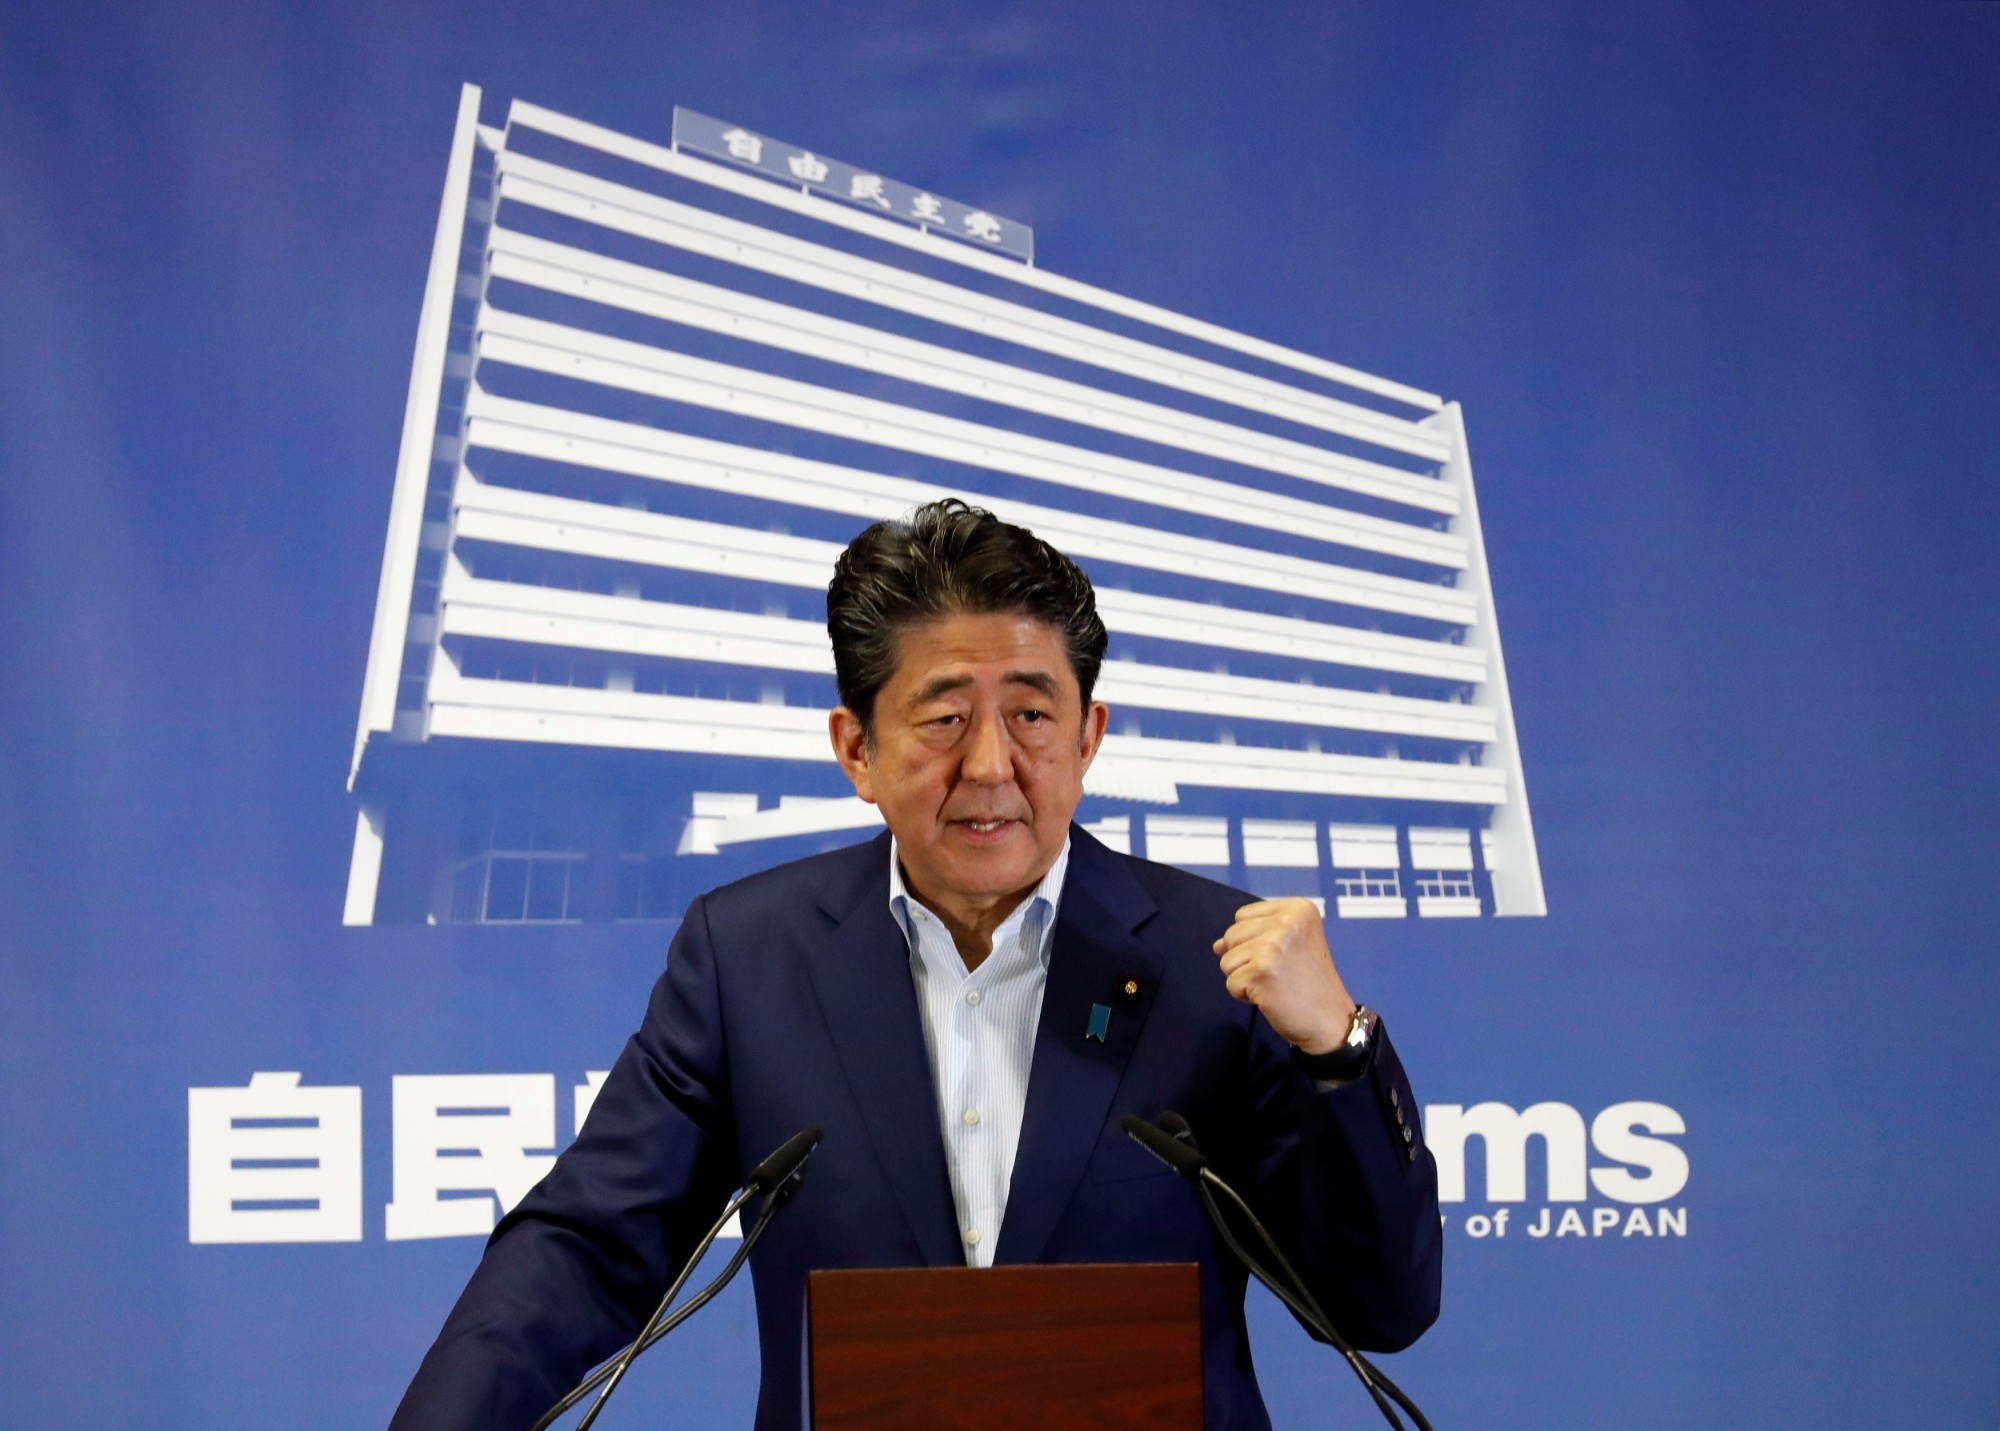 Prime Minister Shinzo Abe, who is also leader of the Liberal Democratic Party, gestures during a news conference a day after Sunday's Upper House election at LDP headquarters in Tokyo. | REUTERS